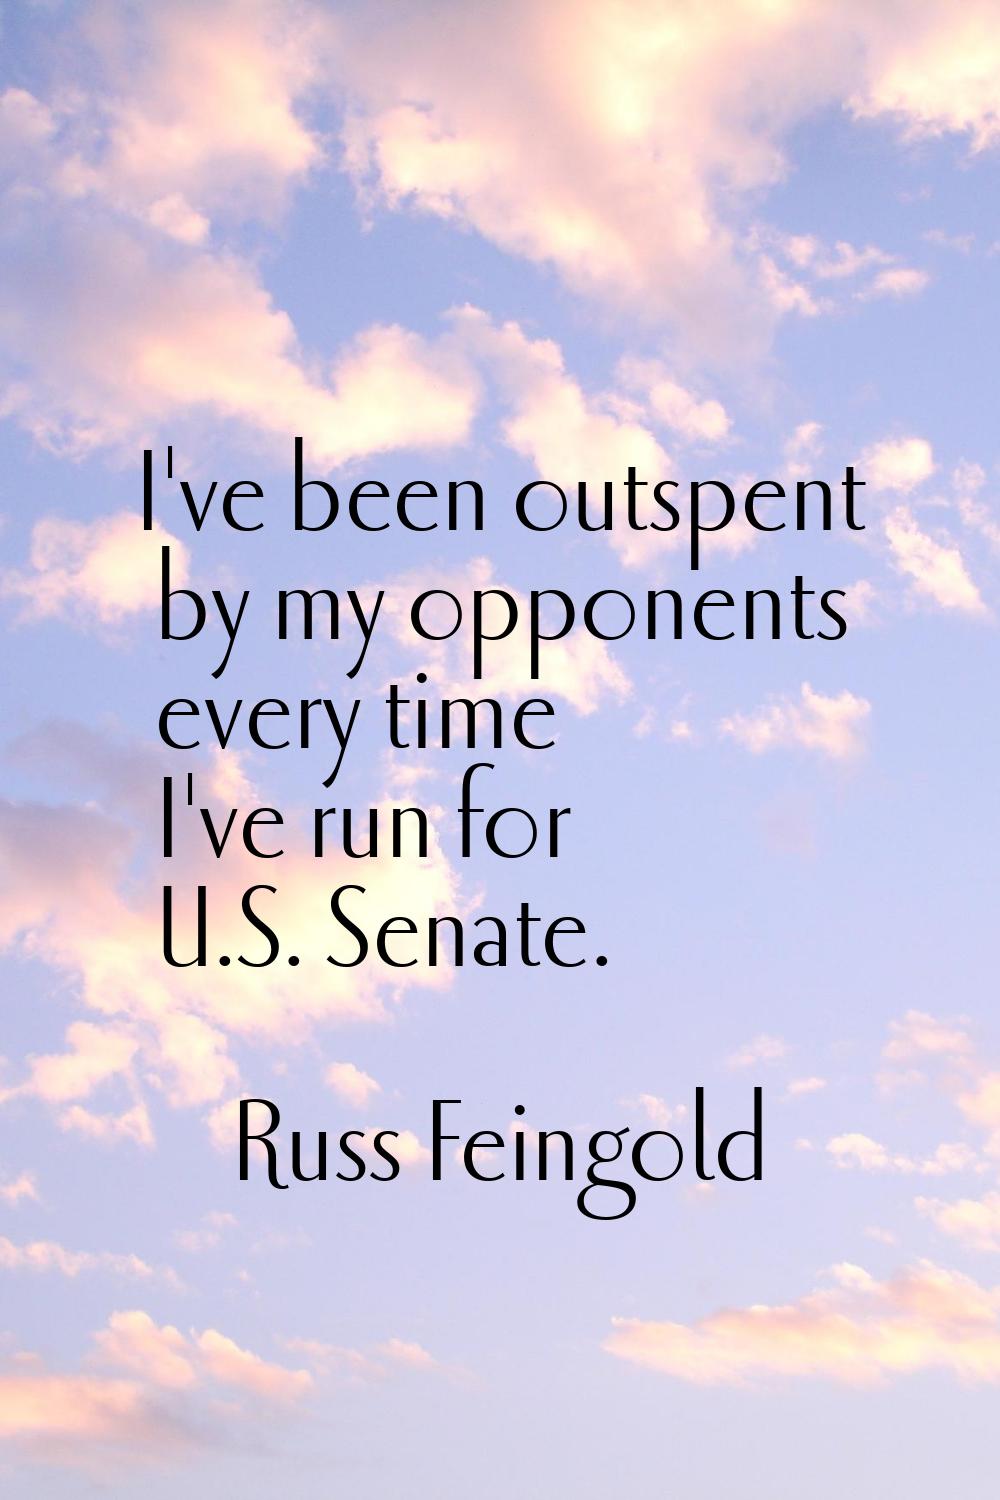 I've been outspent by my opponents every time I've run for U.S. Senate.